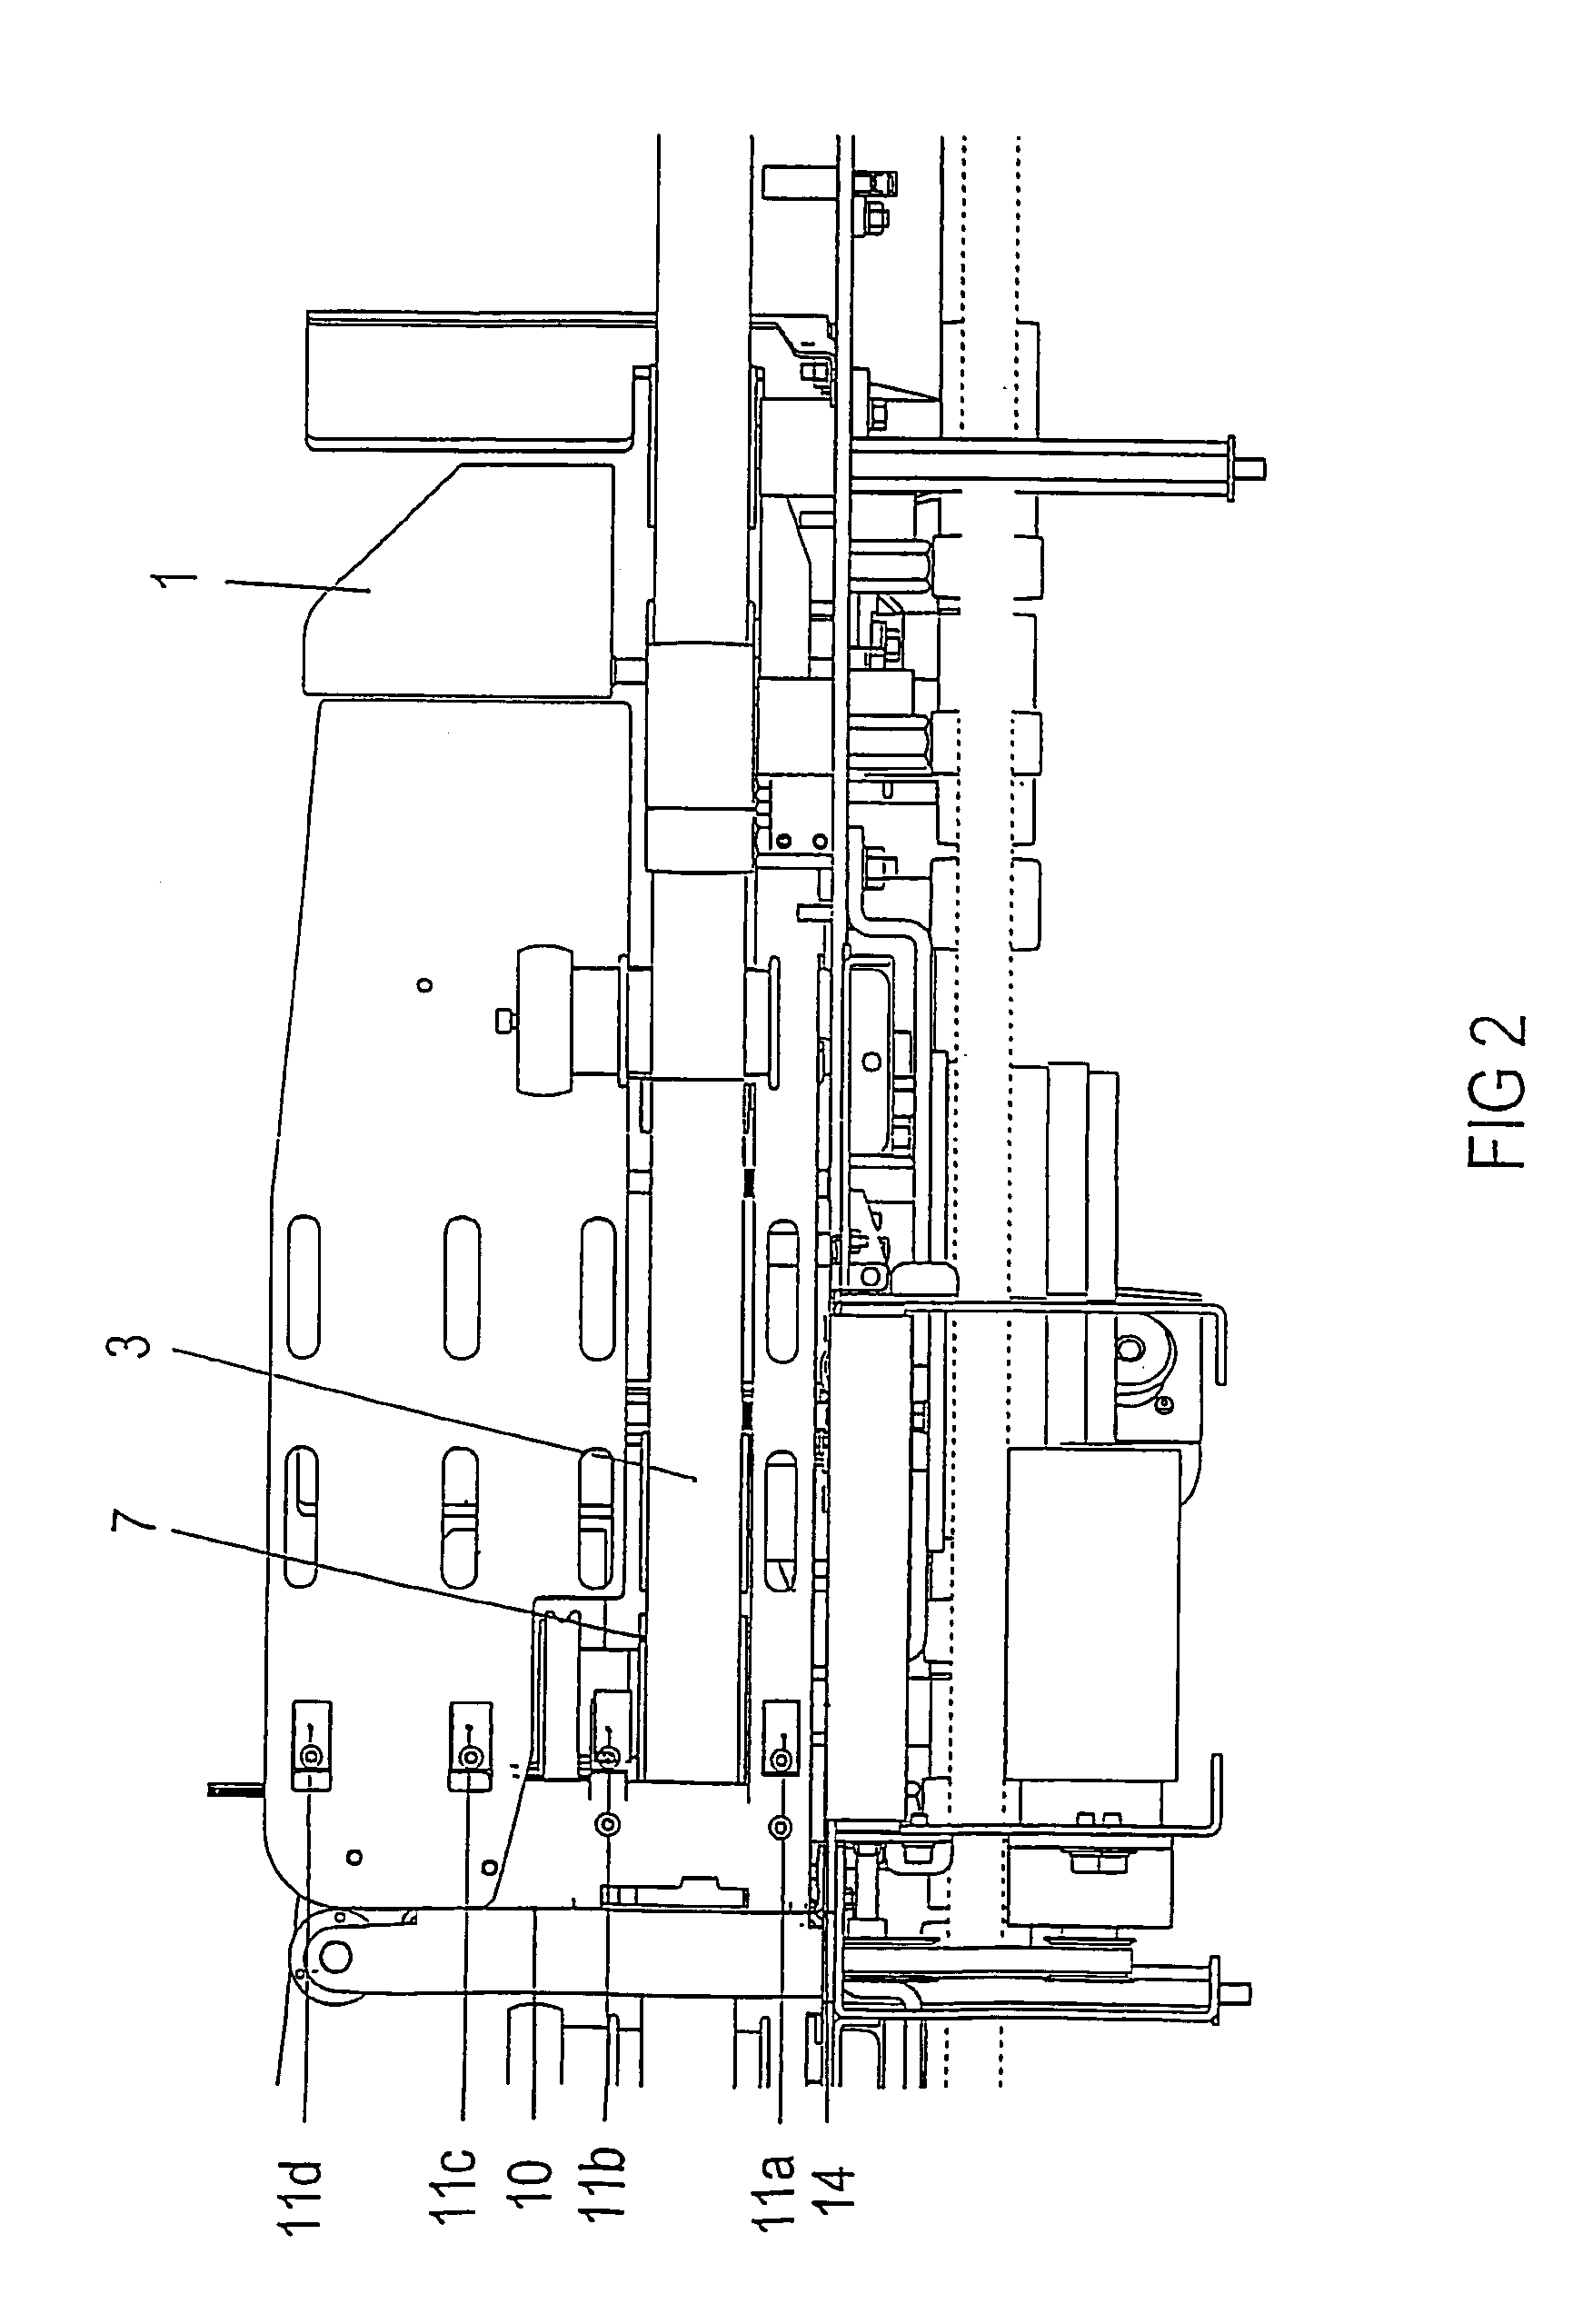 Method and device for stacking flat mailings